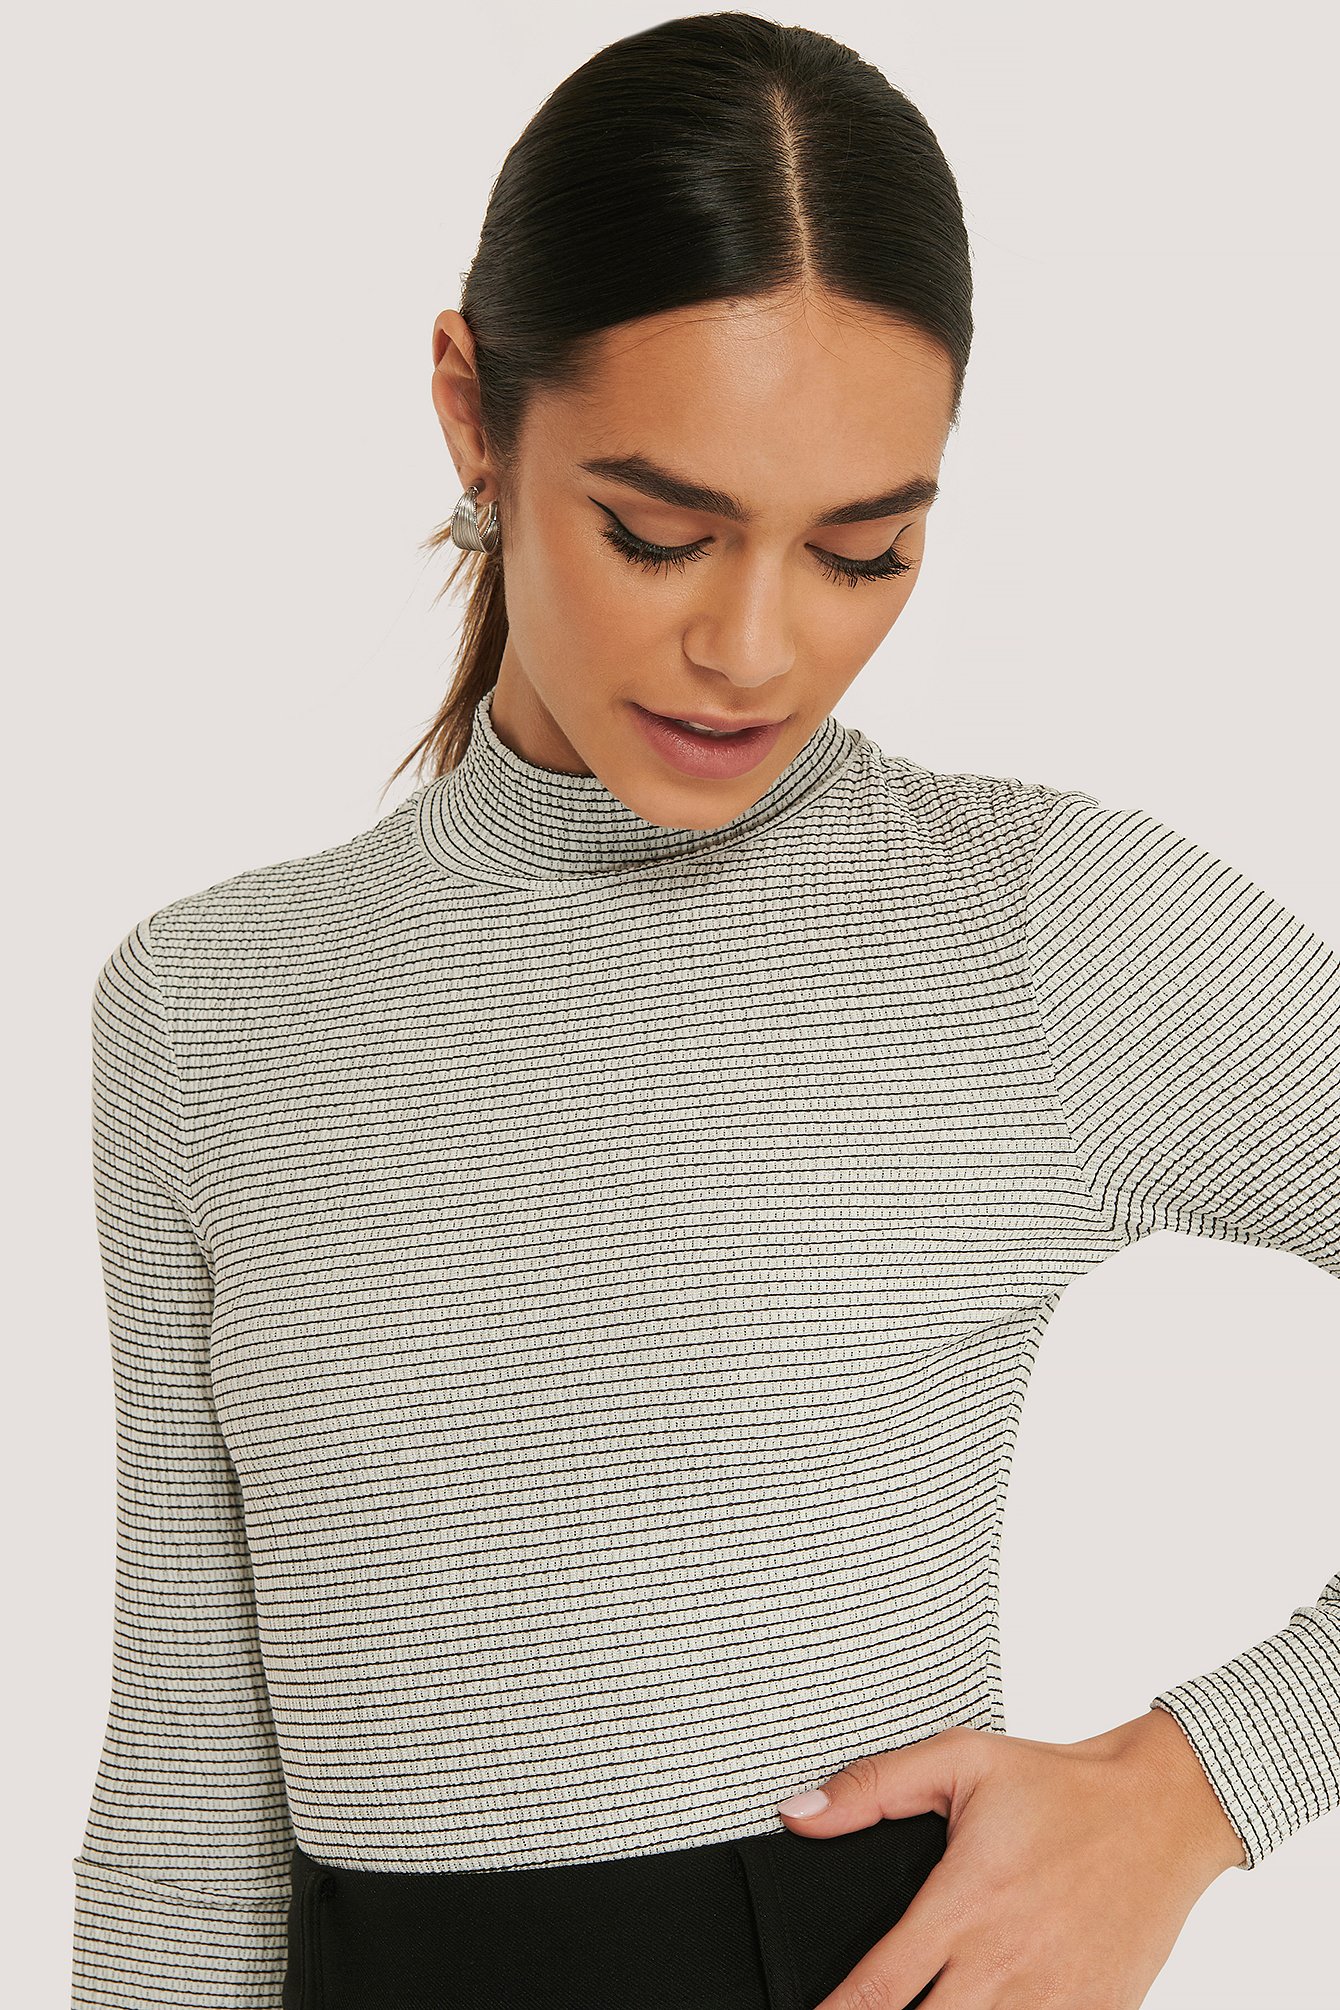 White/Black Structured High Neck Top